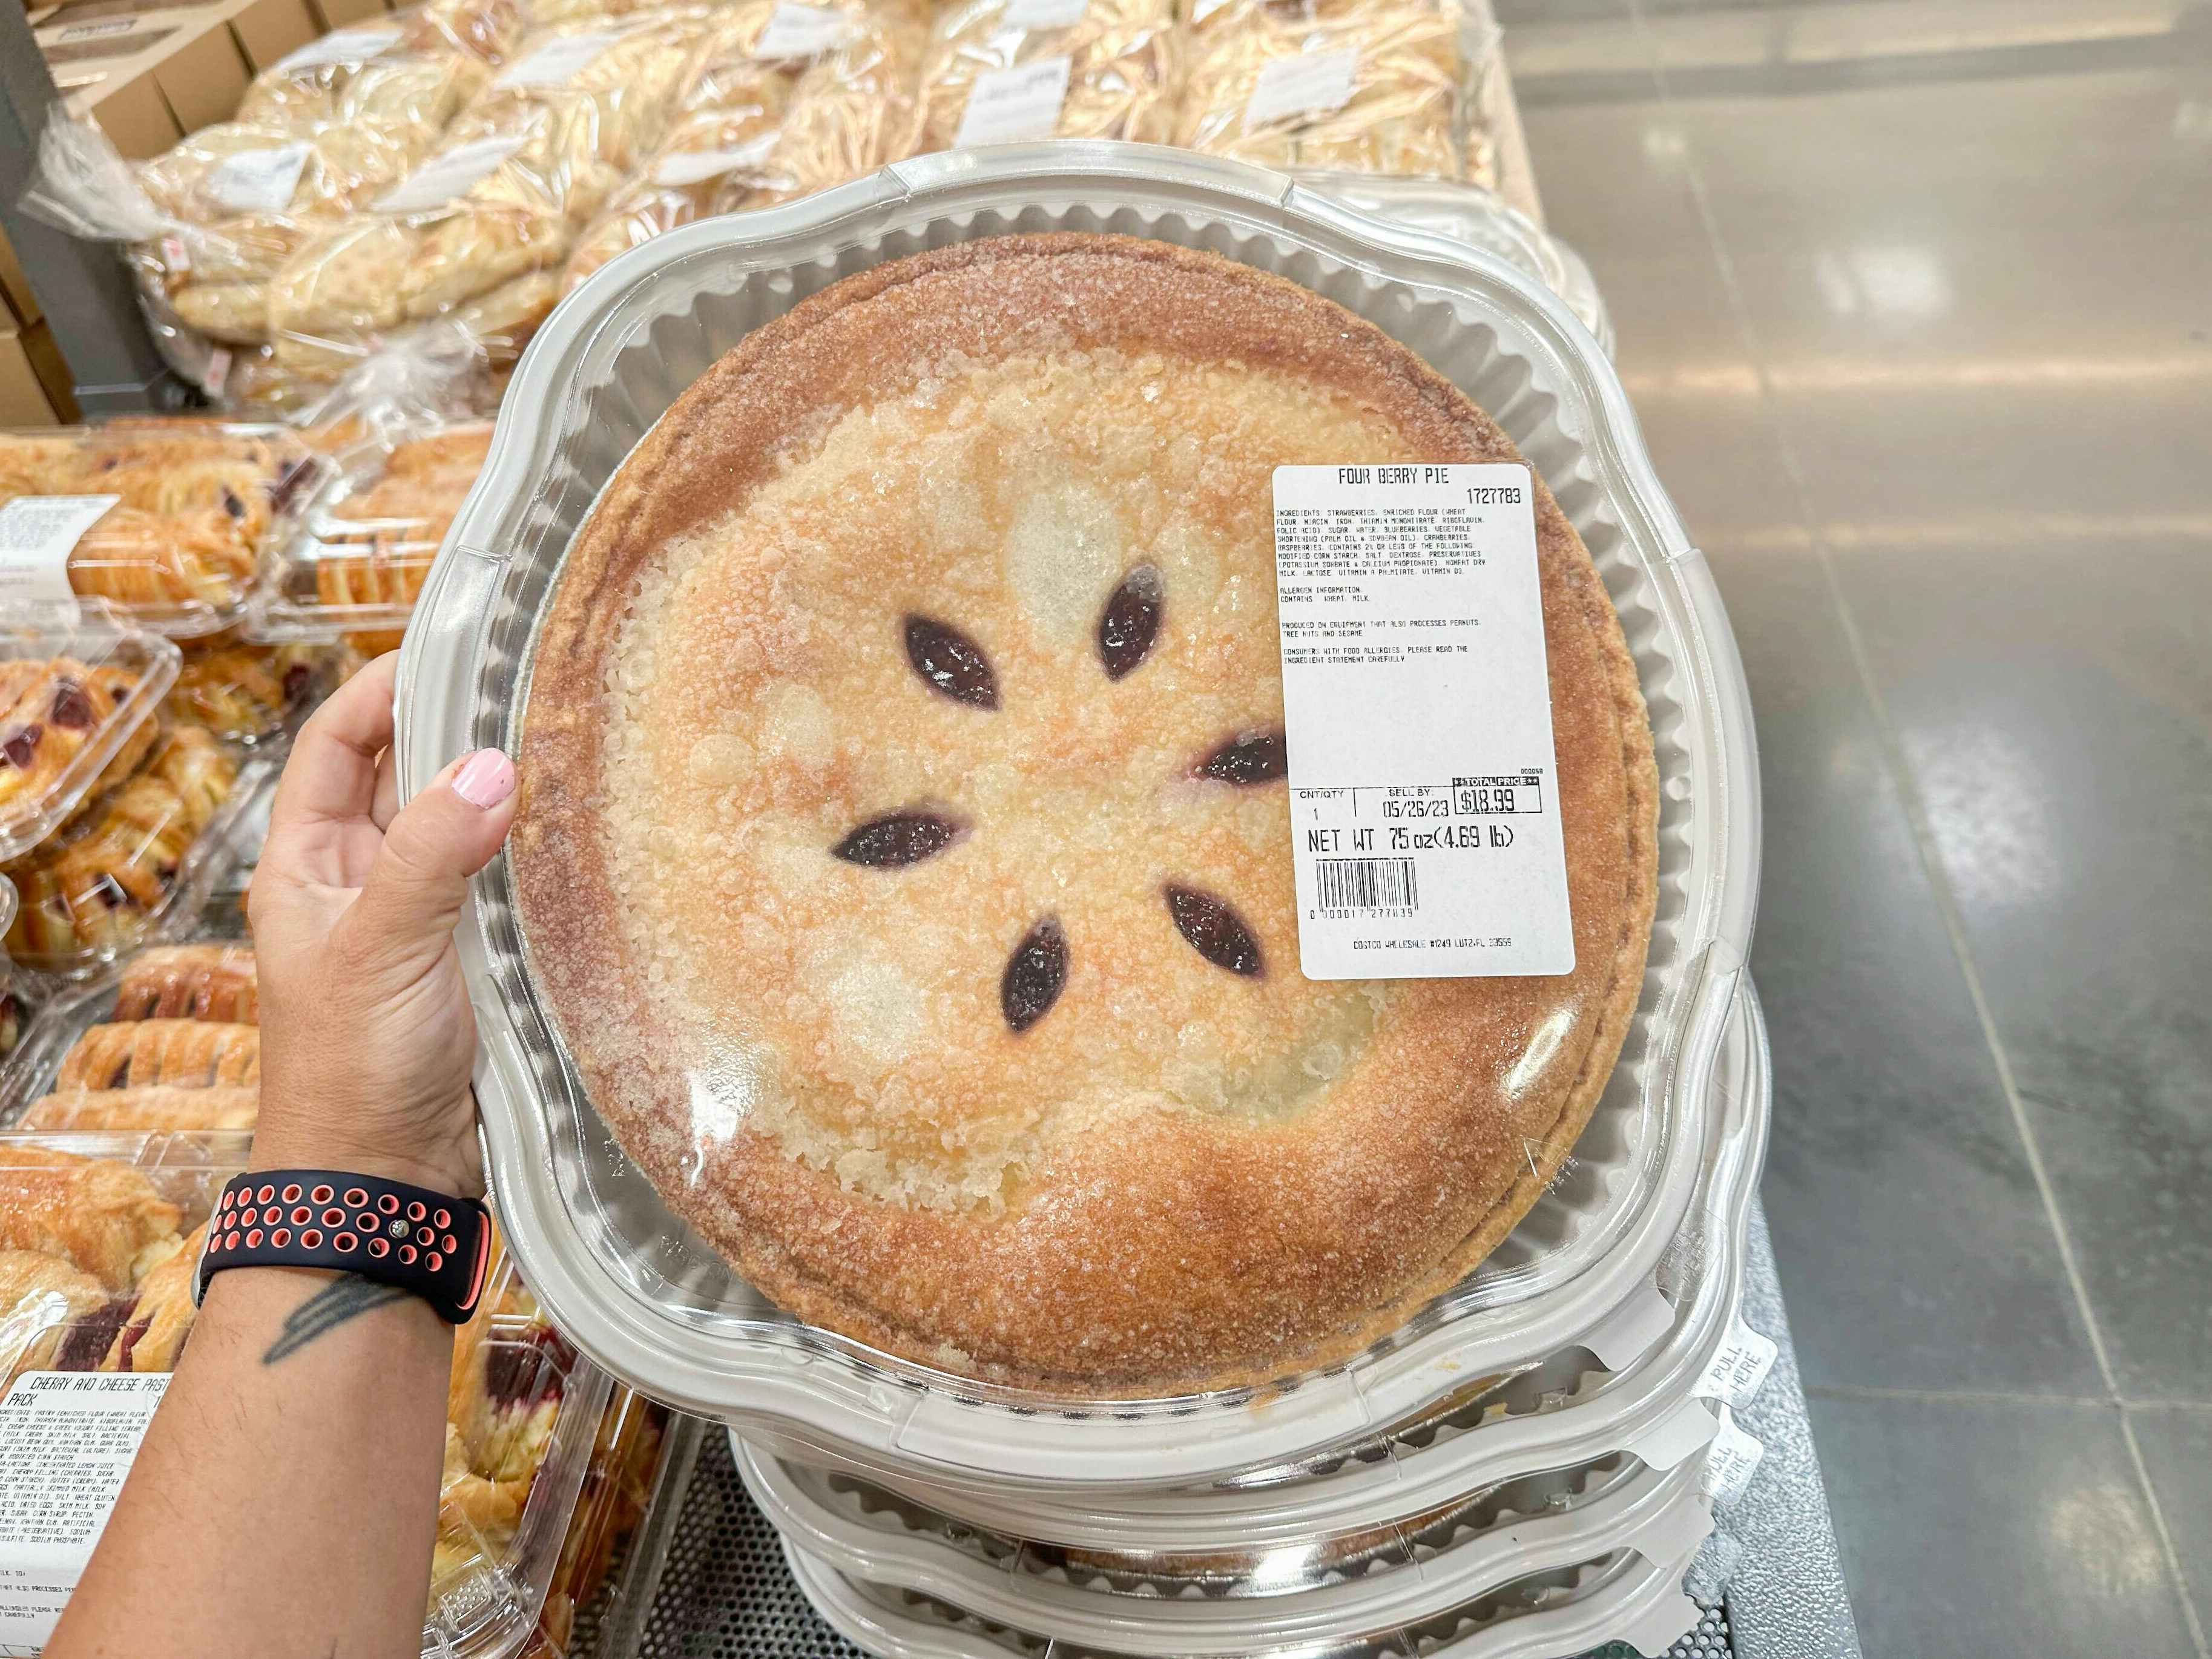 a person holding up a four berry pie at costco